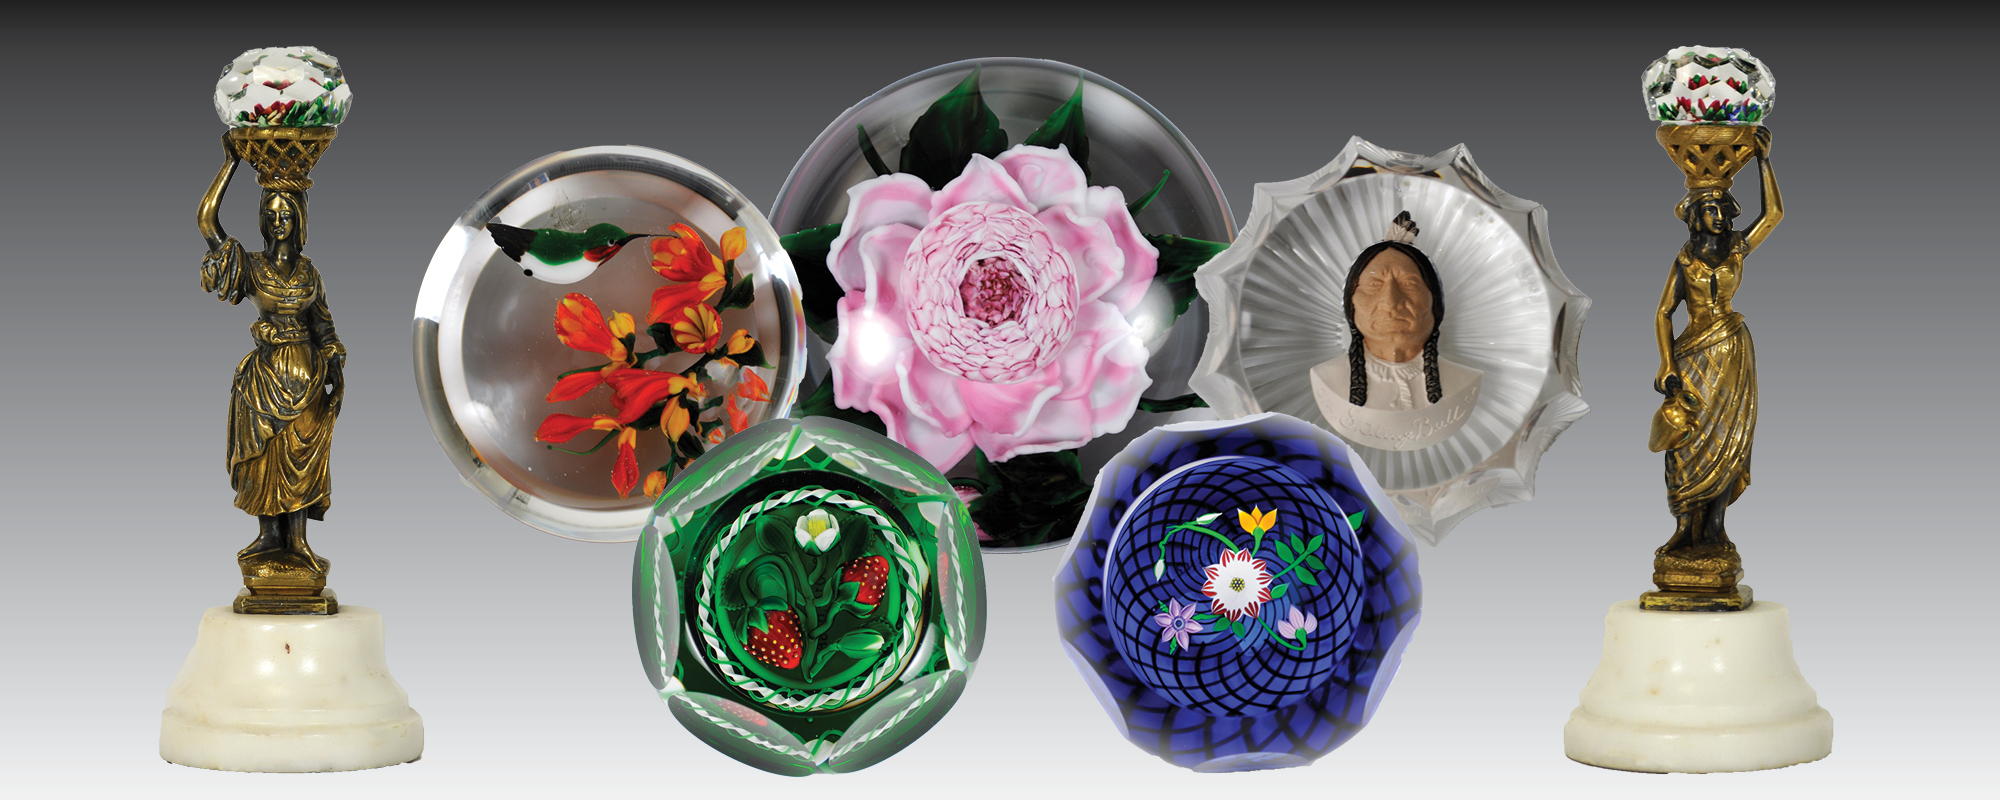 Various paperweights with glass objects inside: a hummingbird, a pink cabbage rose, Sitting Bull, strawberries, and flowers. Two statues of women holding baskets on their heads with a glass orb inside flank the paperweights. 